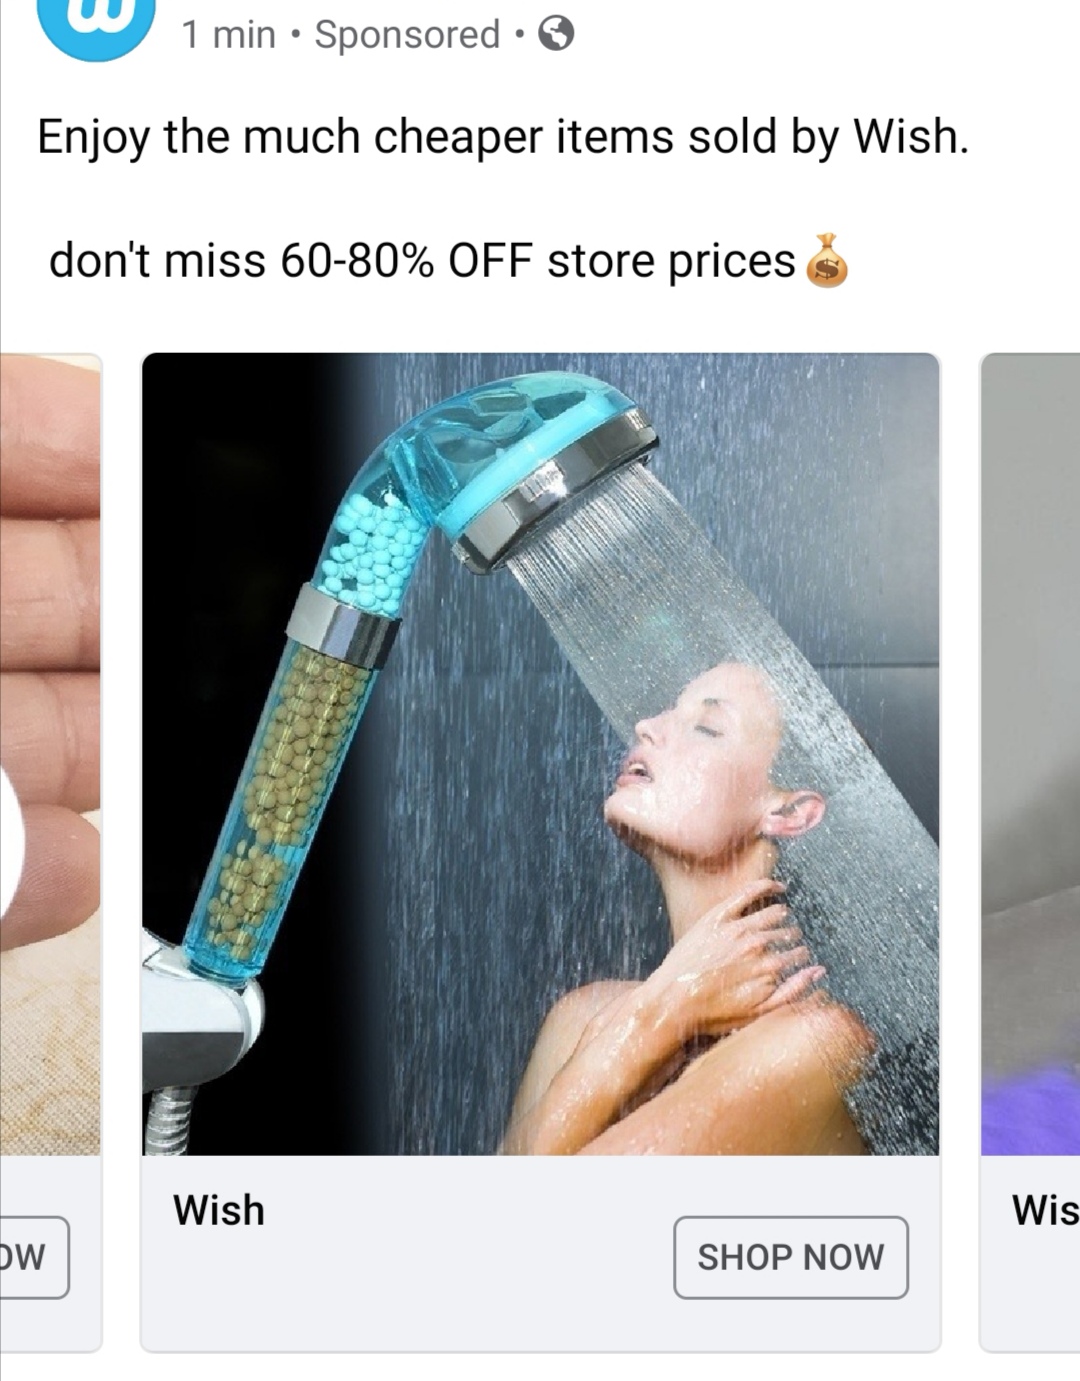 Shower - 1 min Sponsored Enjoy the much cheaper items sold by Wish. don't miss 6080% Off store prices $ Wish Wis Dw Shop Now